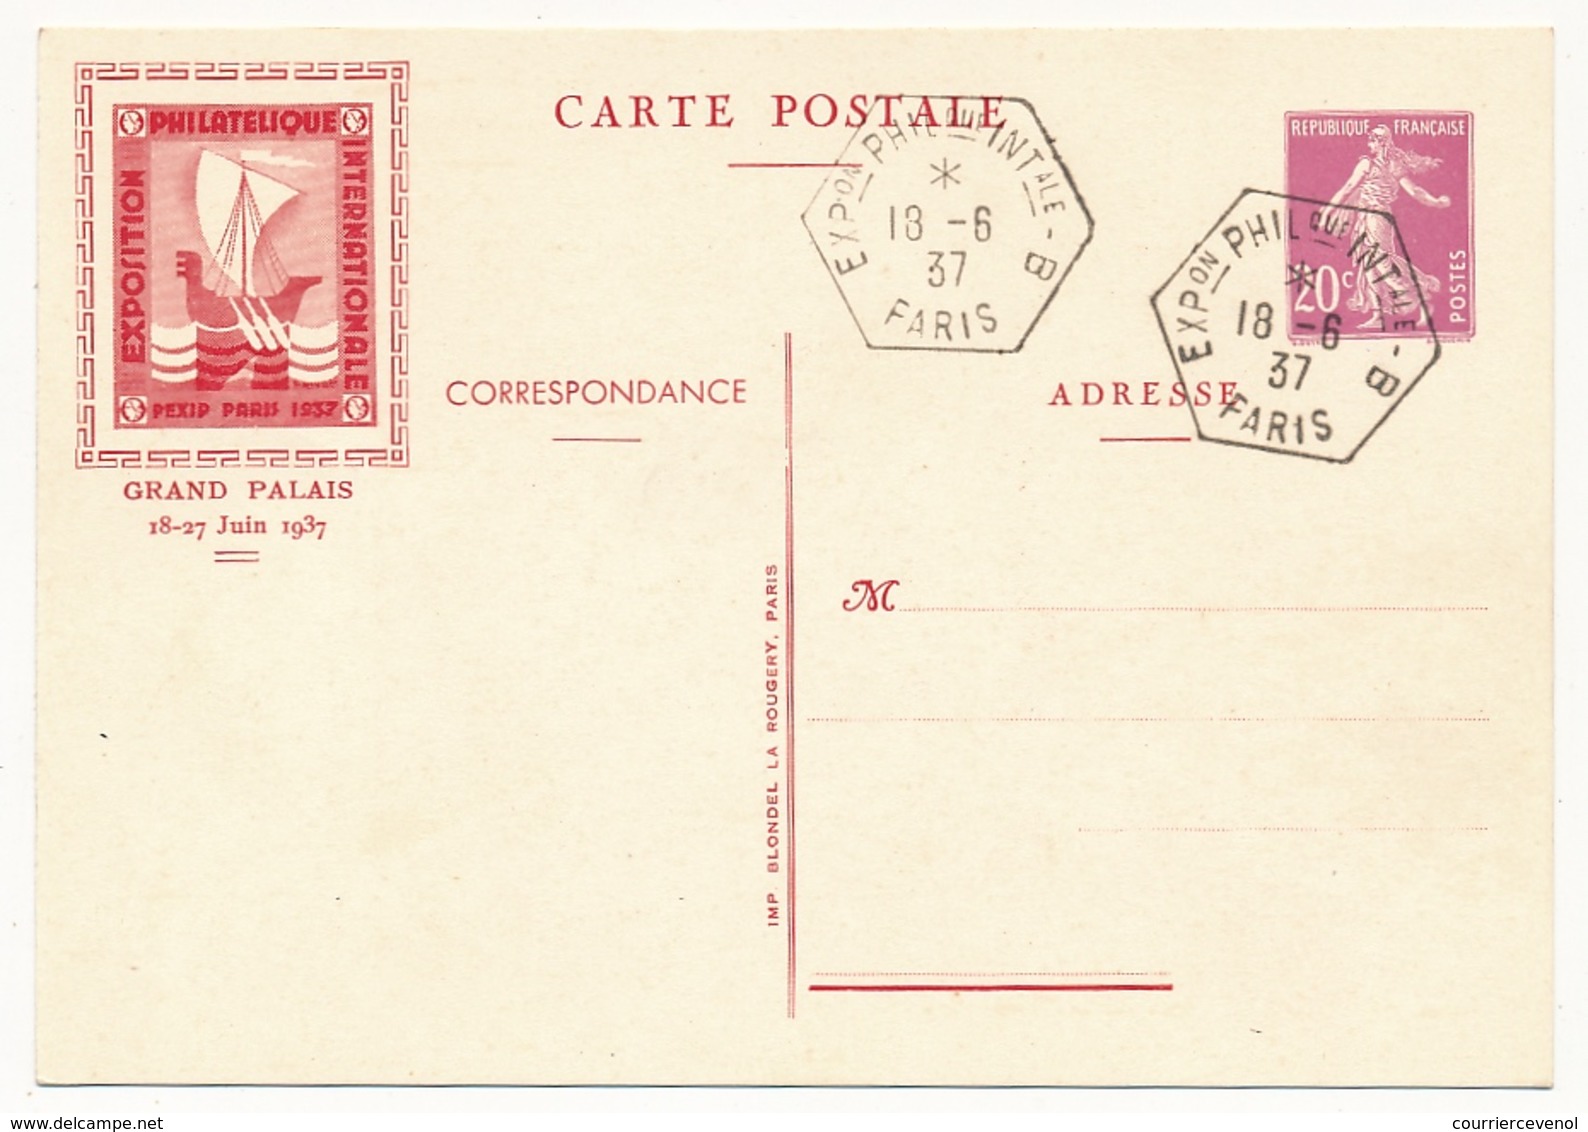 FRANCE - 2 CP (entiers TSC) Exposition PEXIP 1937 - 1 Neuve, 1 Oblitérée - Standard Postcards & Stamped On Demand (before 1995)